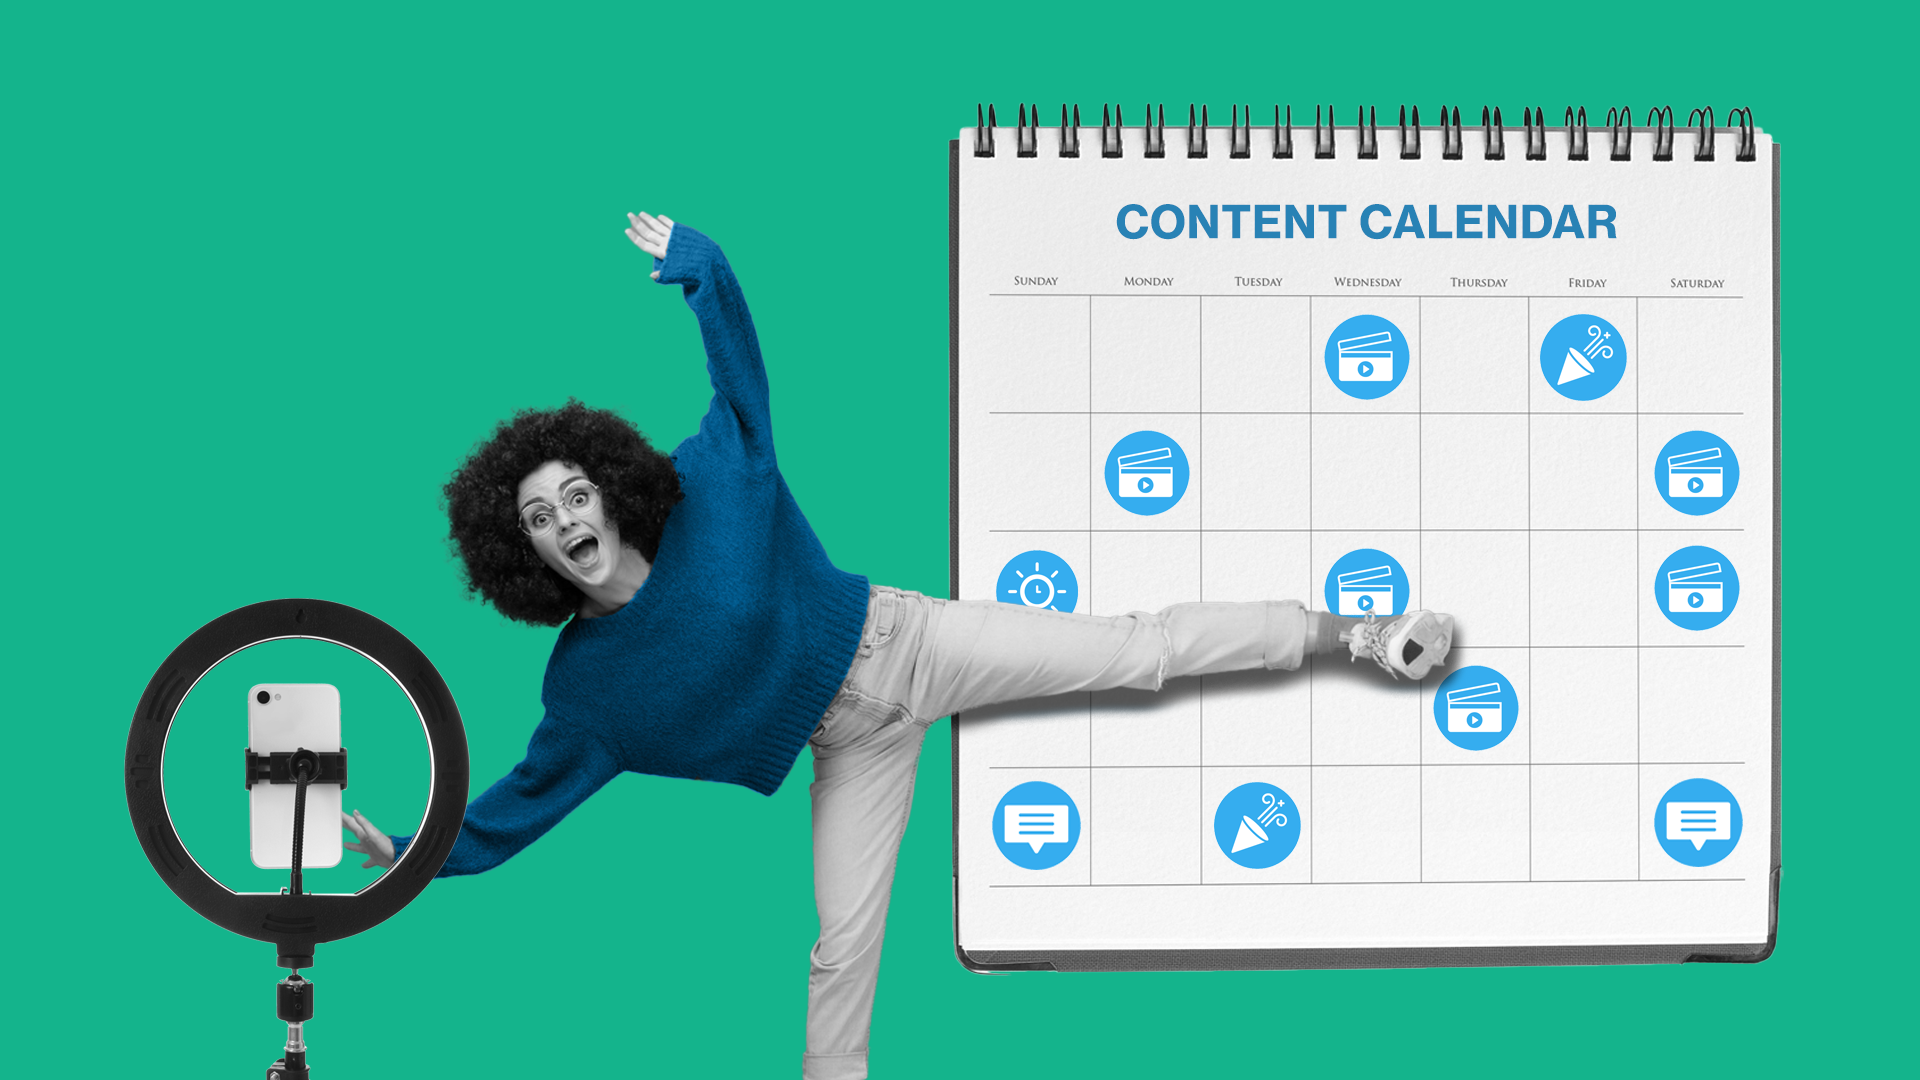 This image features someone dancing behind a tripod with a phone, showcasing someone making a TikTok. Behind them is a calendar to represent the TikTok content calendar. Overall, this image represents the effective creation of a TikTok content calendar.